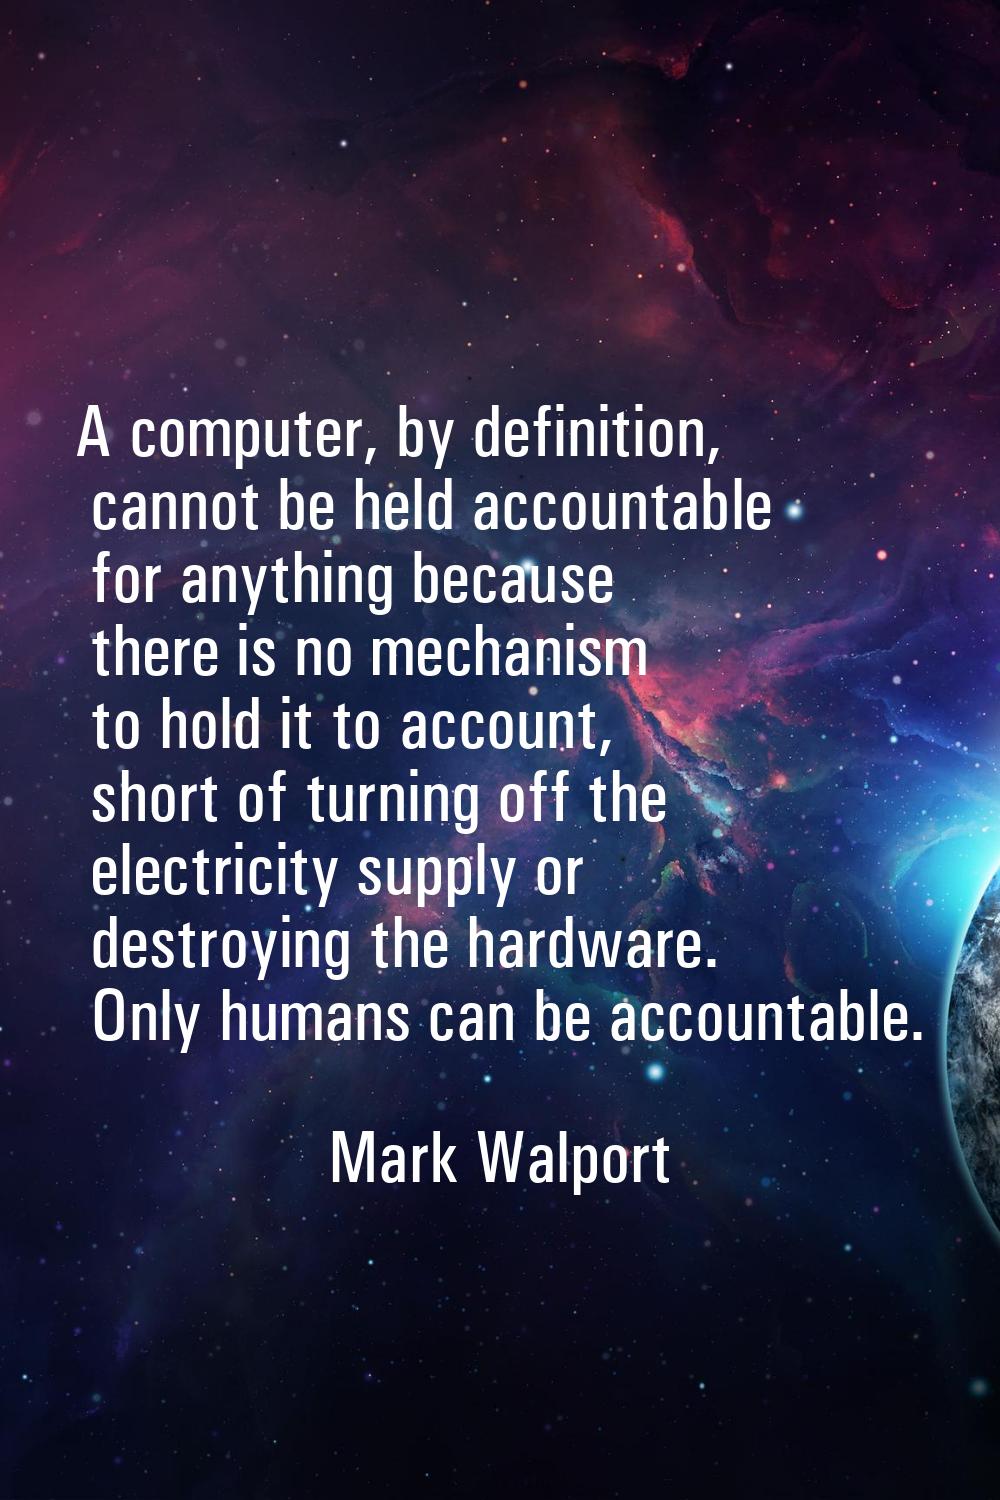 A computer, by definition, cannot be held accountable for anything because there is no mechanism to